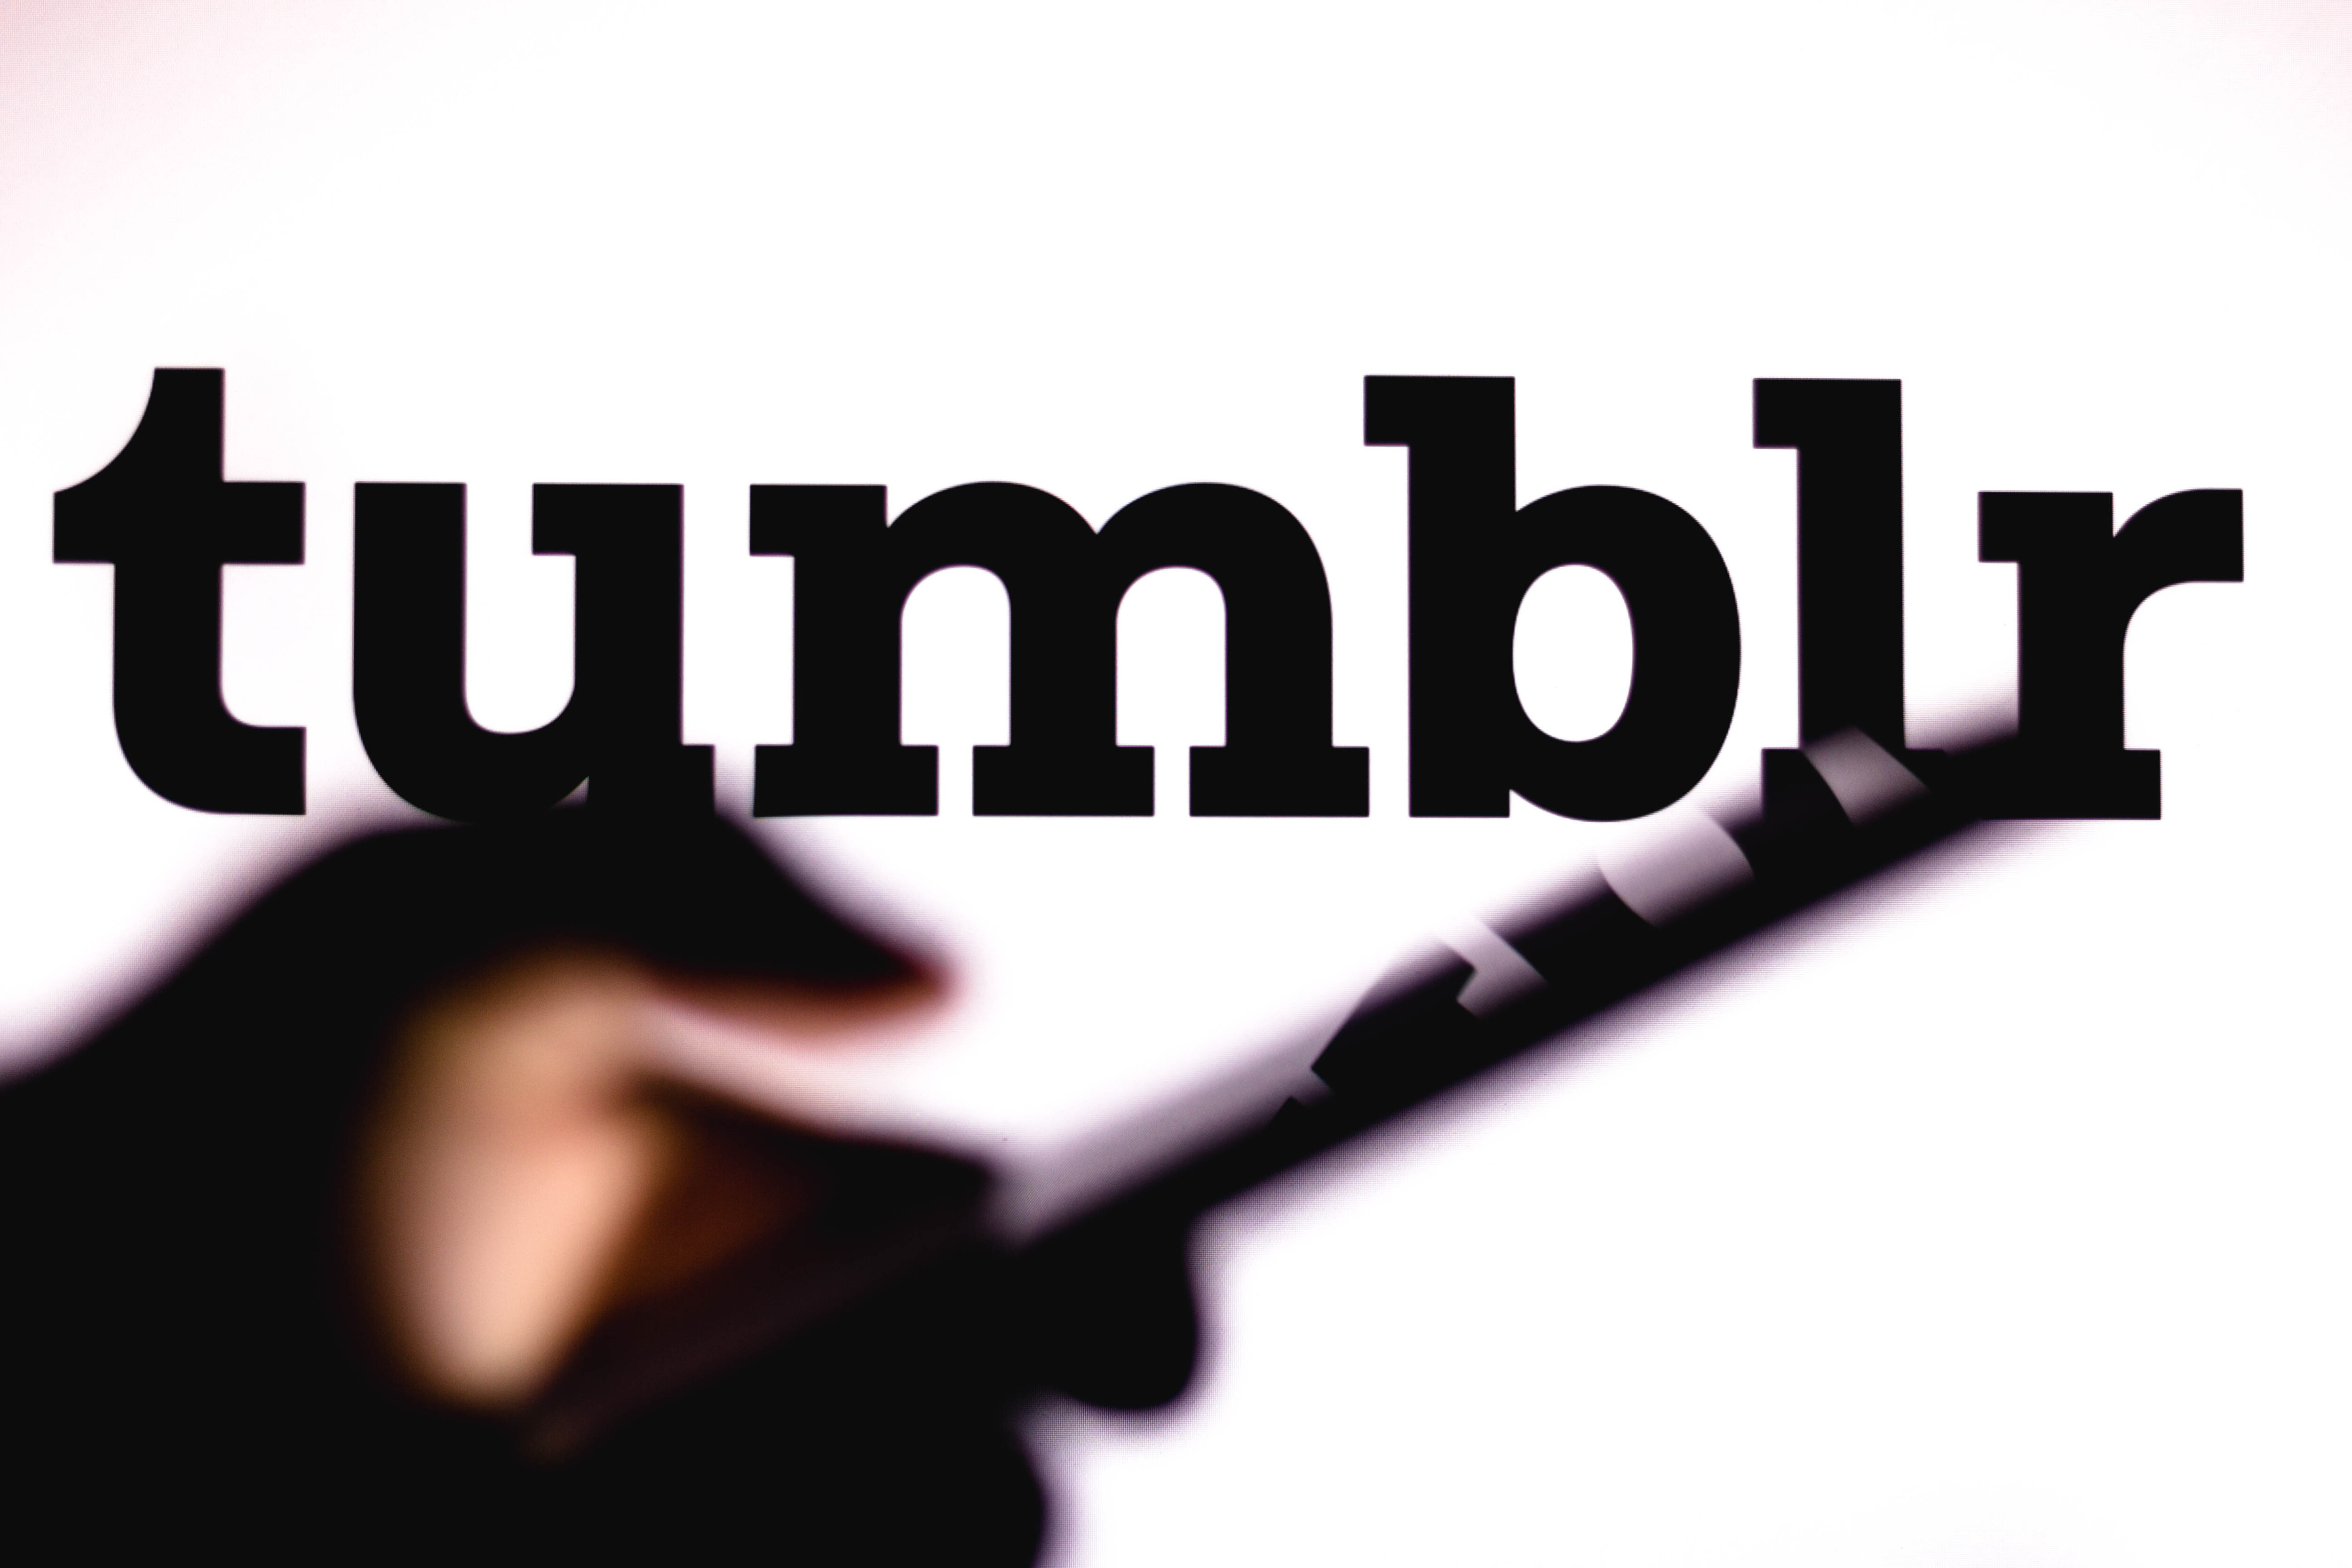 Tumblr allows nudes again, but porn remains off-limits